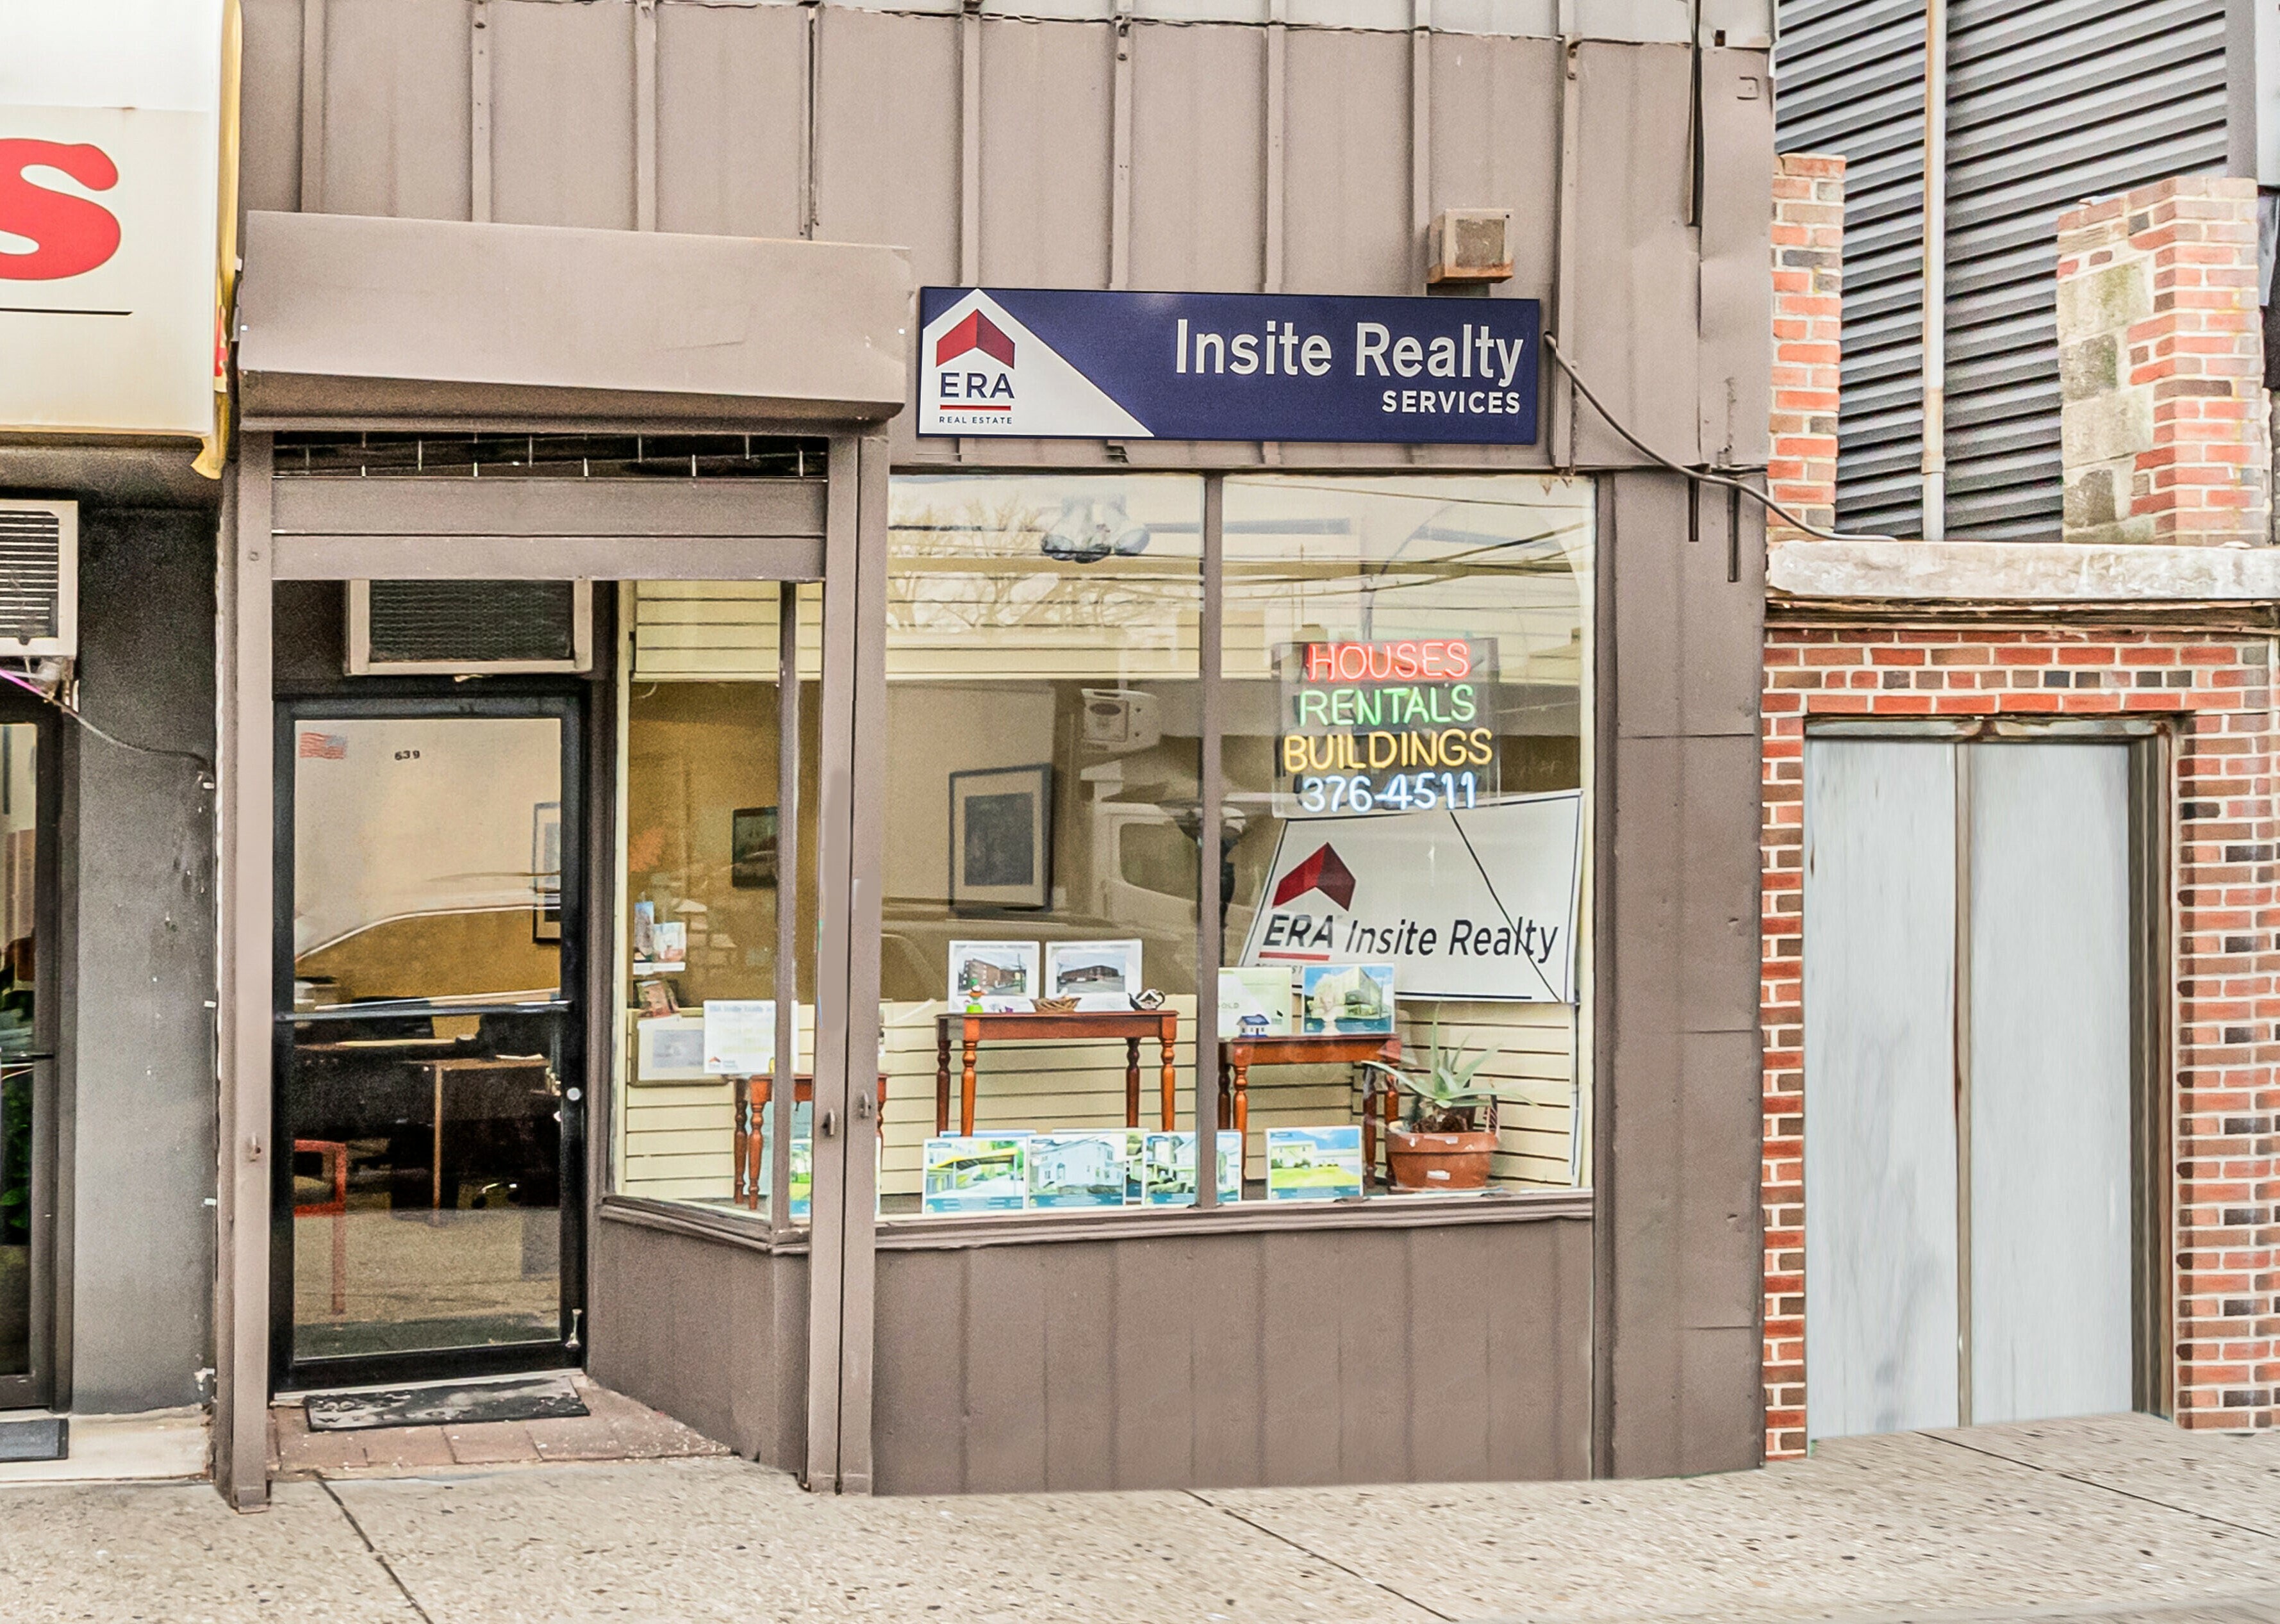 ERA Insite Realty Services,Yonkers,Era Insite Realty Services